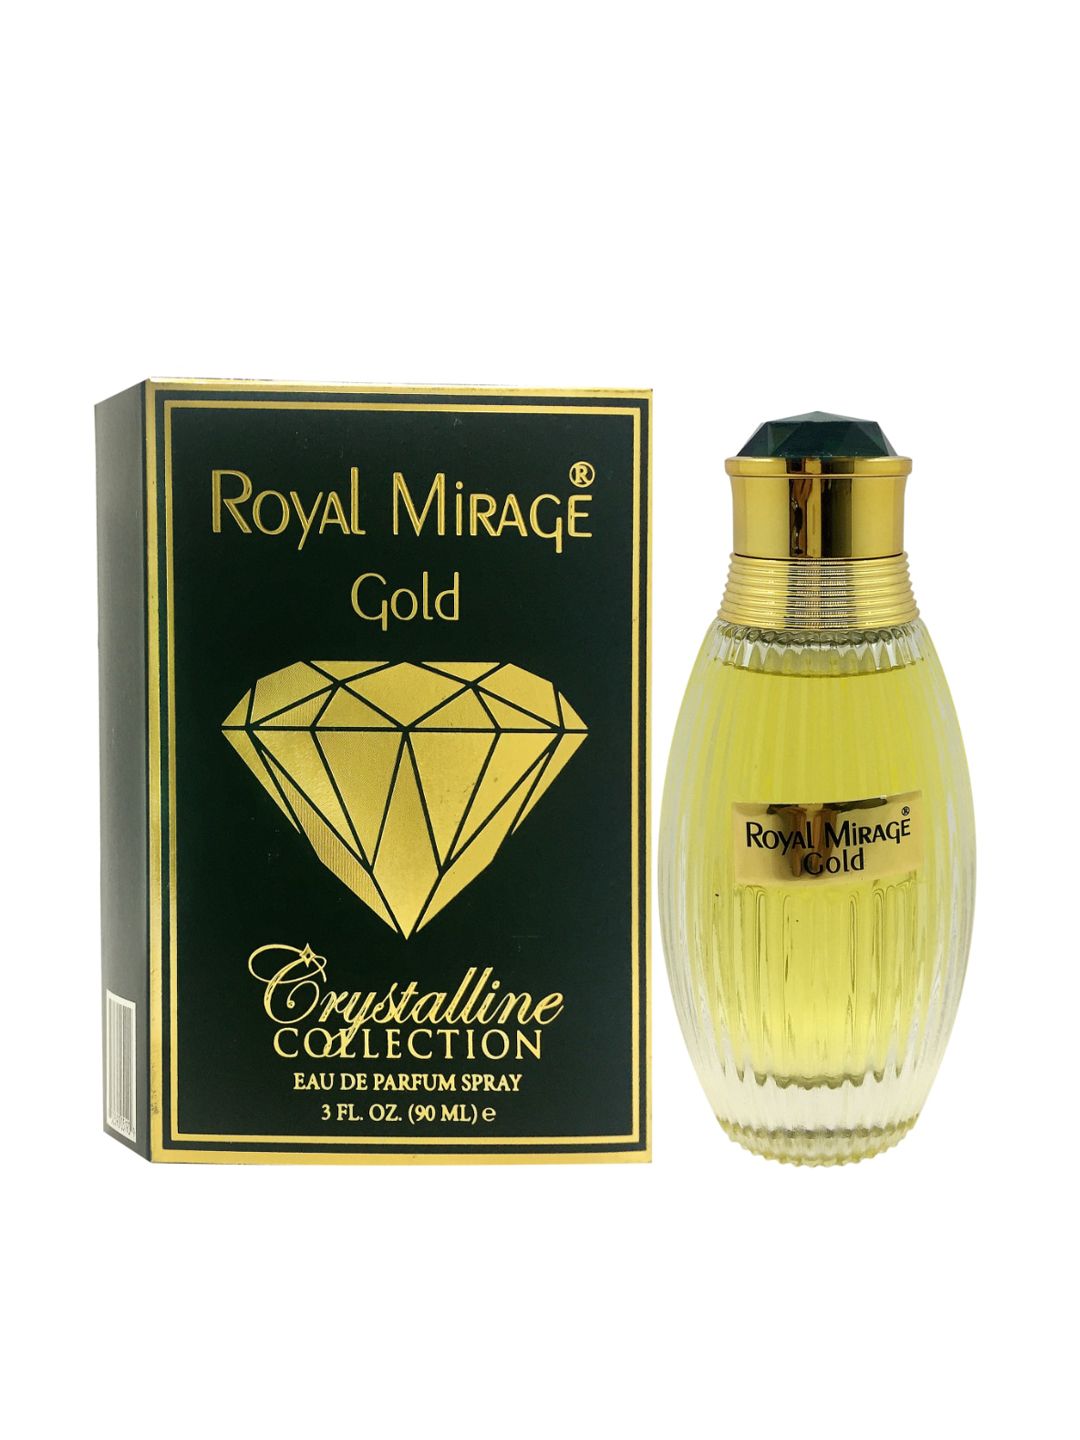 Royal Mirage Gold Crystalline Collection Long Lasting Eau De Parfum Spray 90 ml Price in India